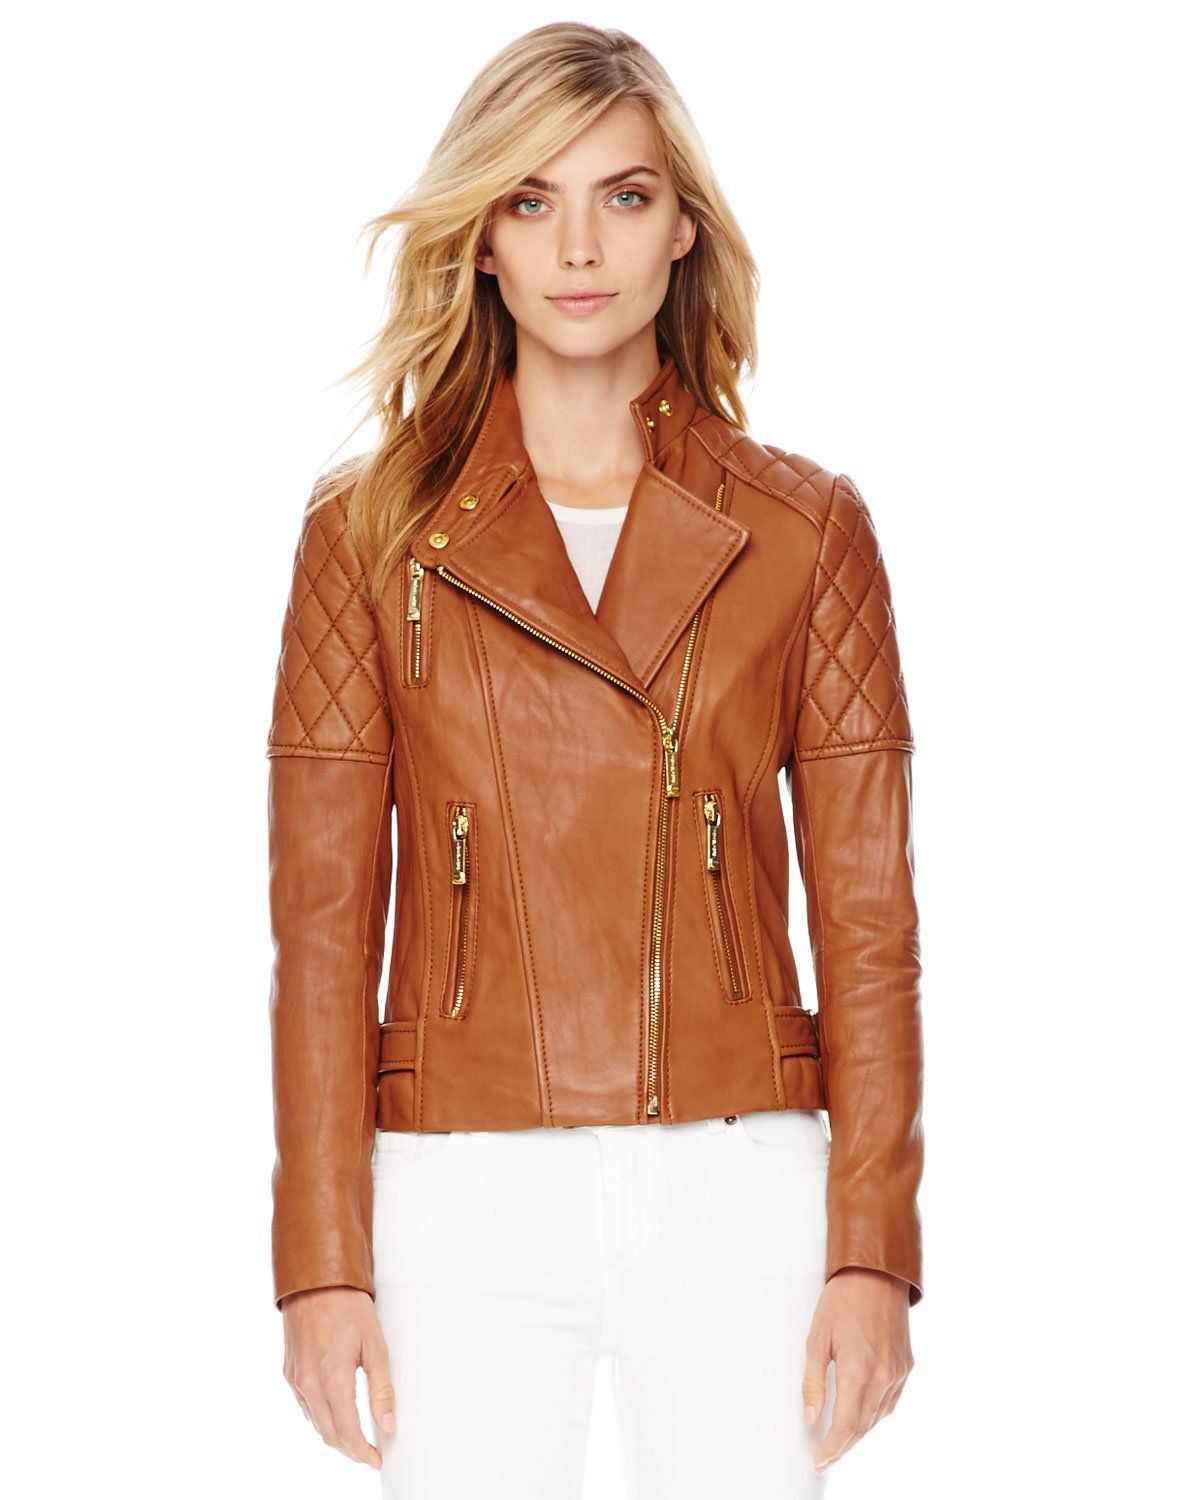 Lyst - Michael Kors Michael Quilted Leather Jacket in Brown